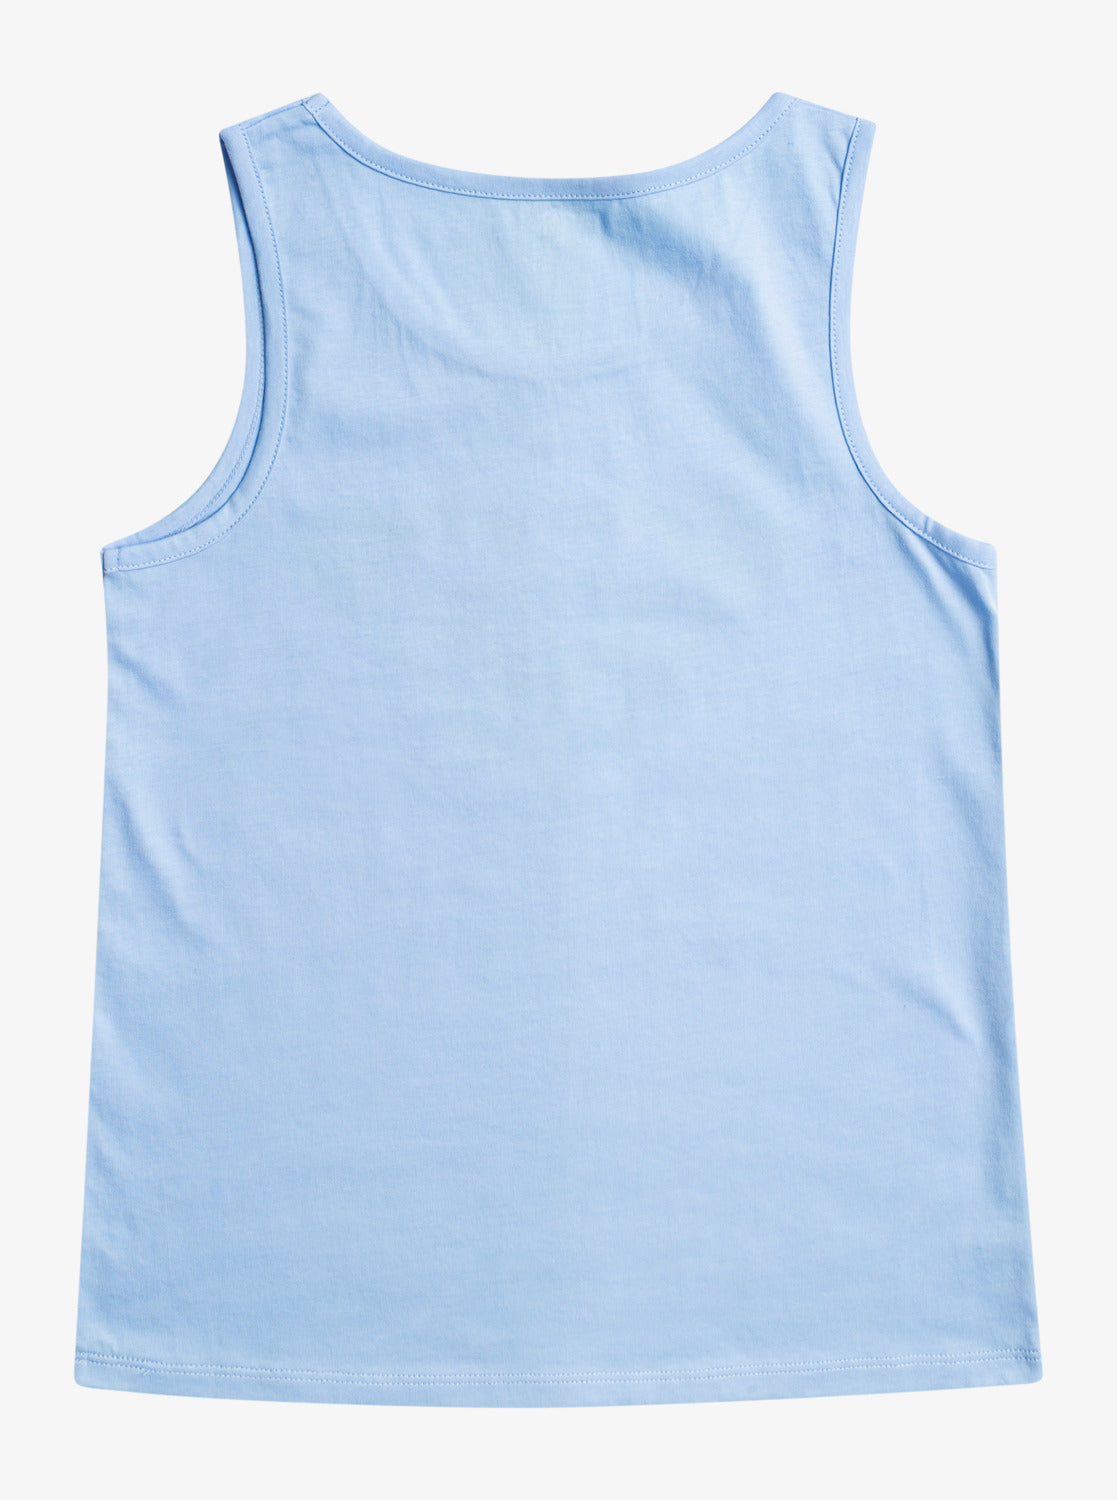 Roxy There Is Life Girls Vest Top in Bel Air Blue